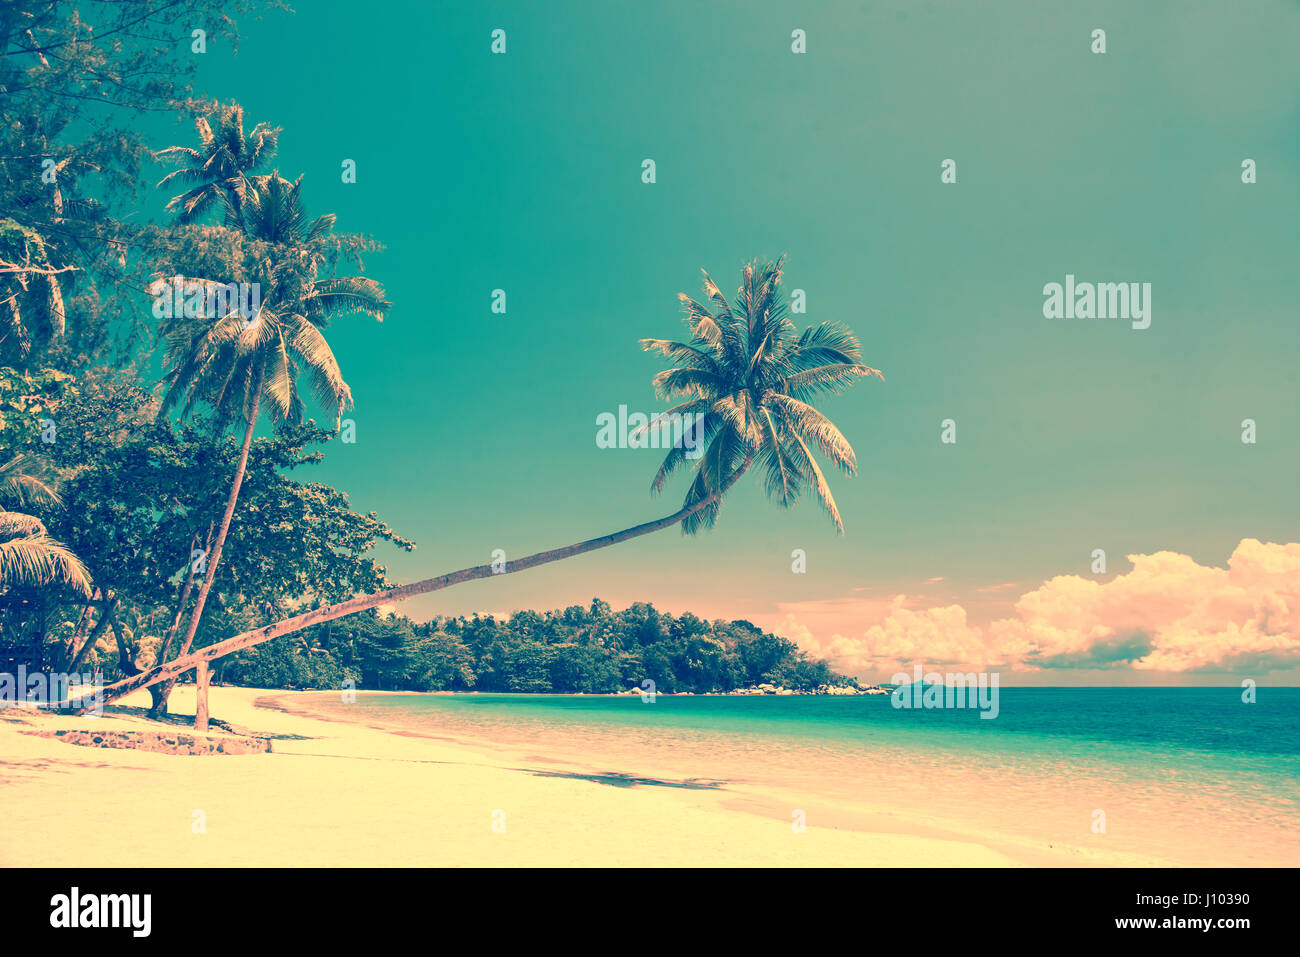 Tropical beach landscape with a leaning palm tree, vintage process Stock Photo